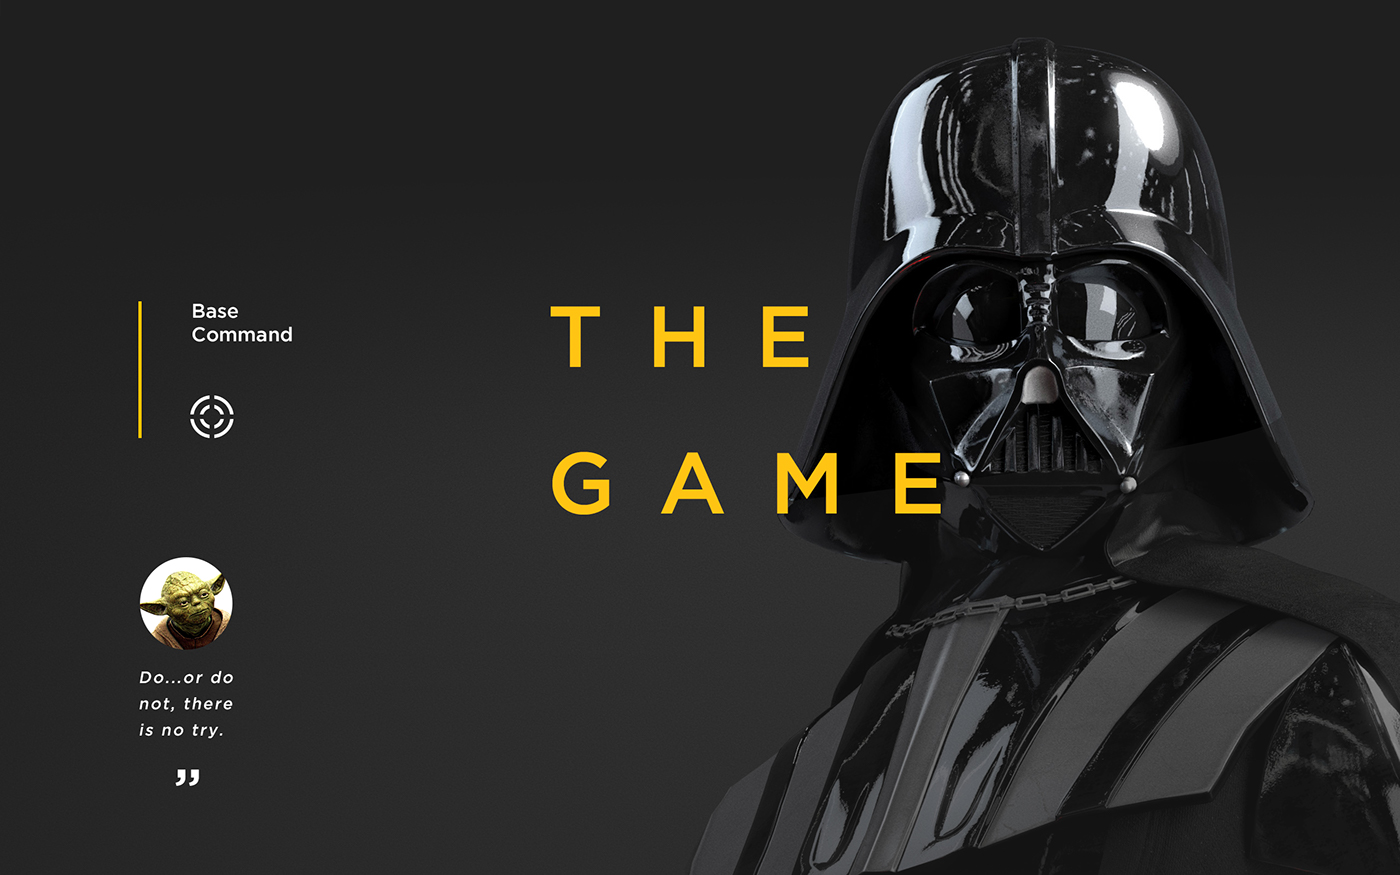 Mobile app star Wars companion battlefront ui ux Interface design user experience game